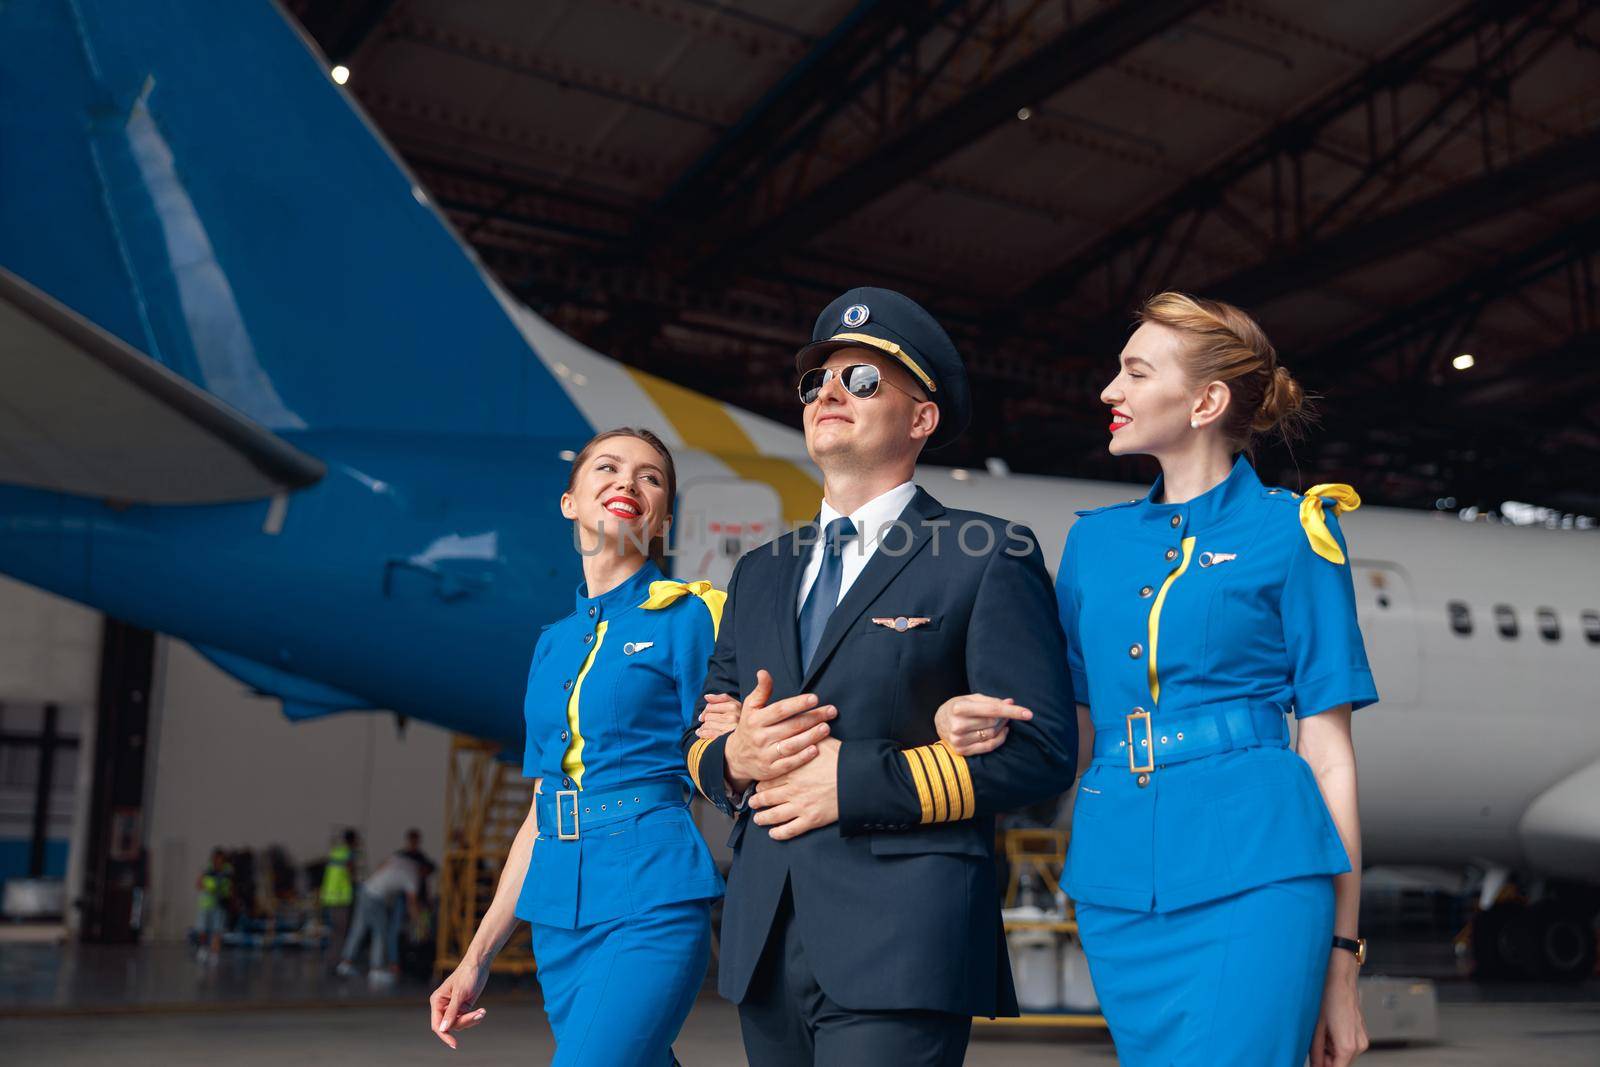 Happy pilot in uniform and aviator sunglasses walking together with two air stewardesses in blue uniform in front of big passenger airplane in airport hangar. Aircraft, occupation concept